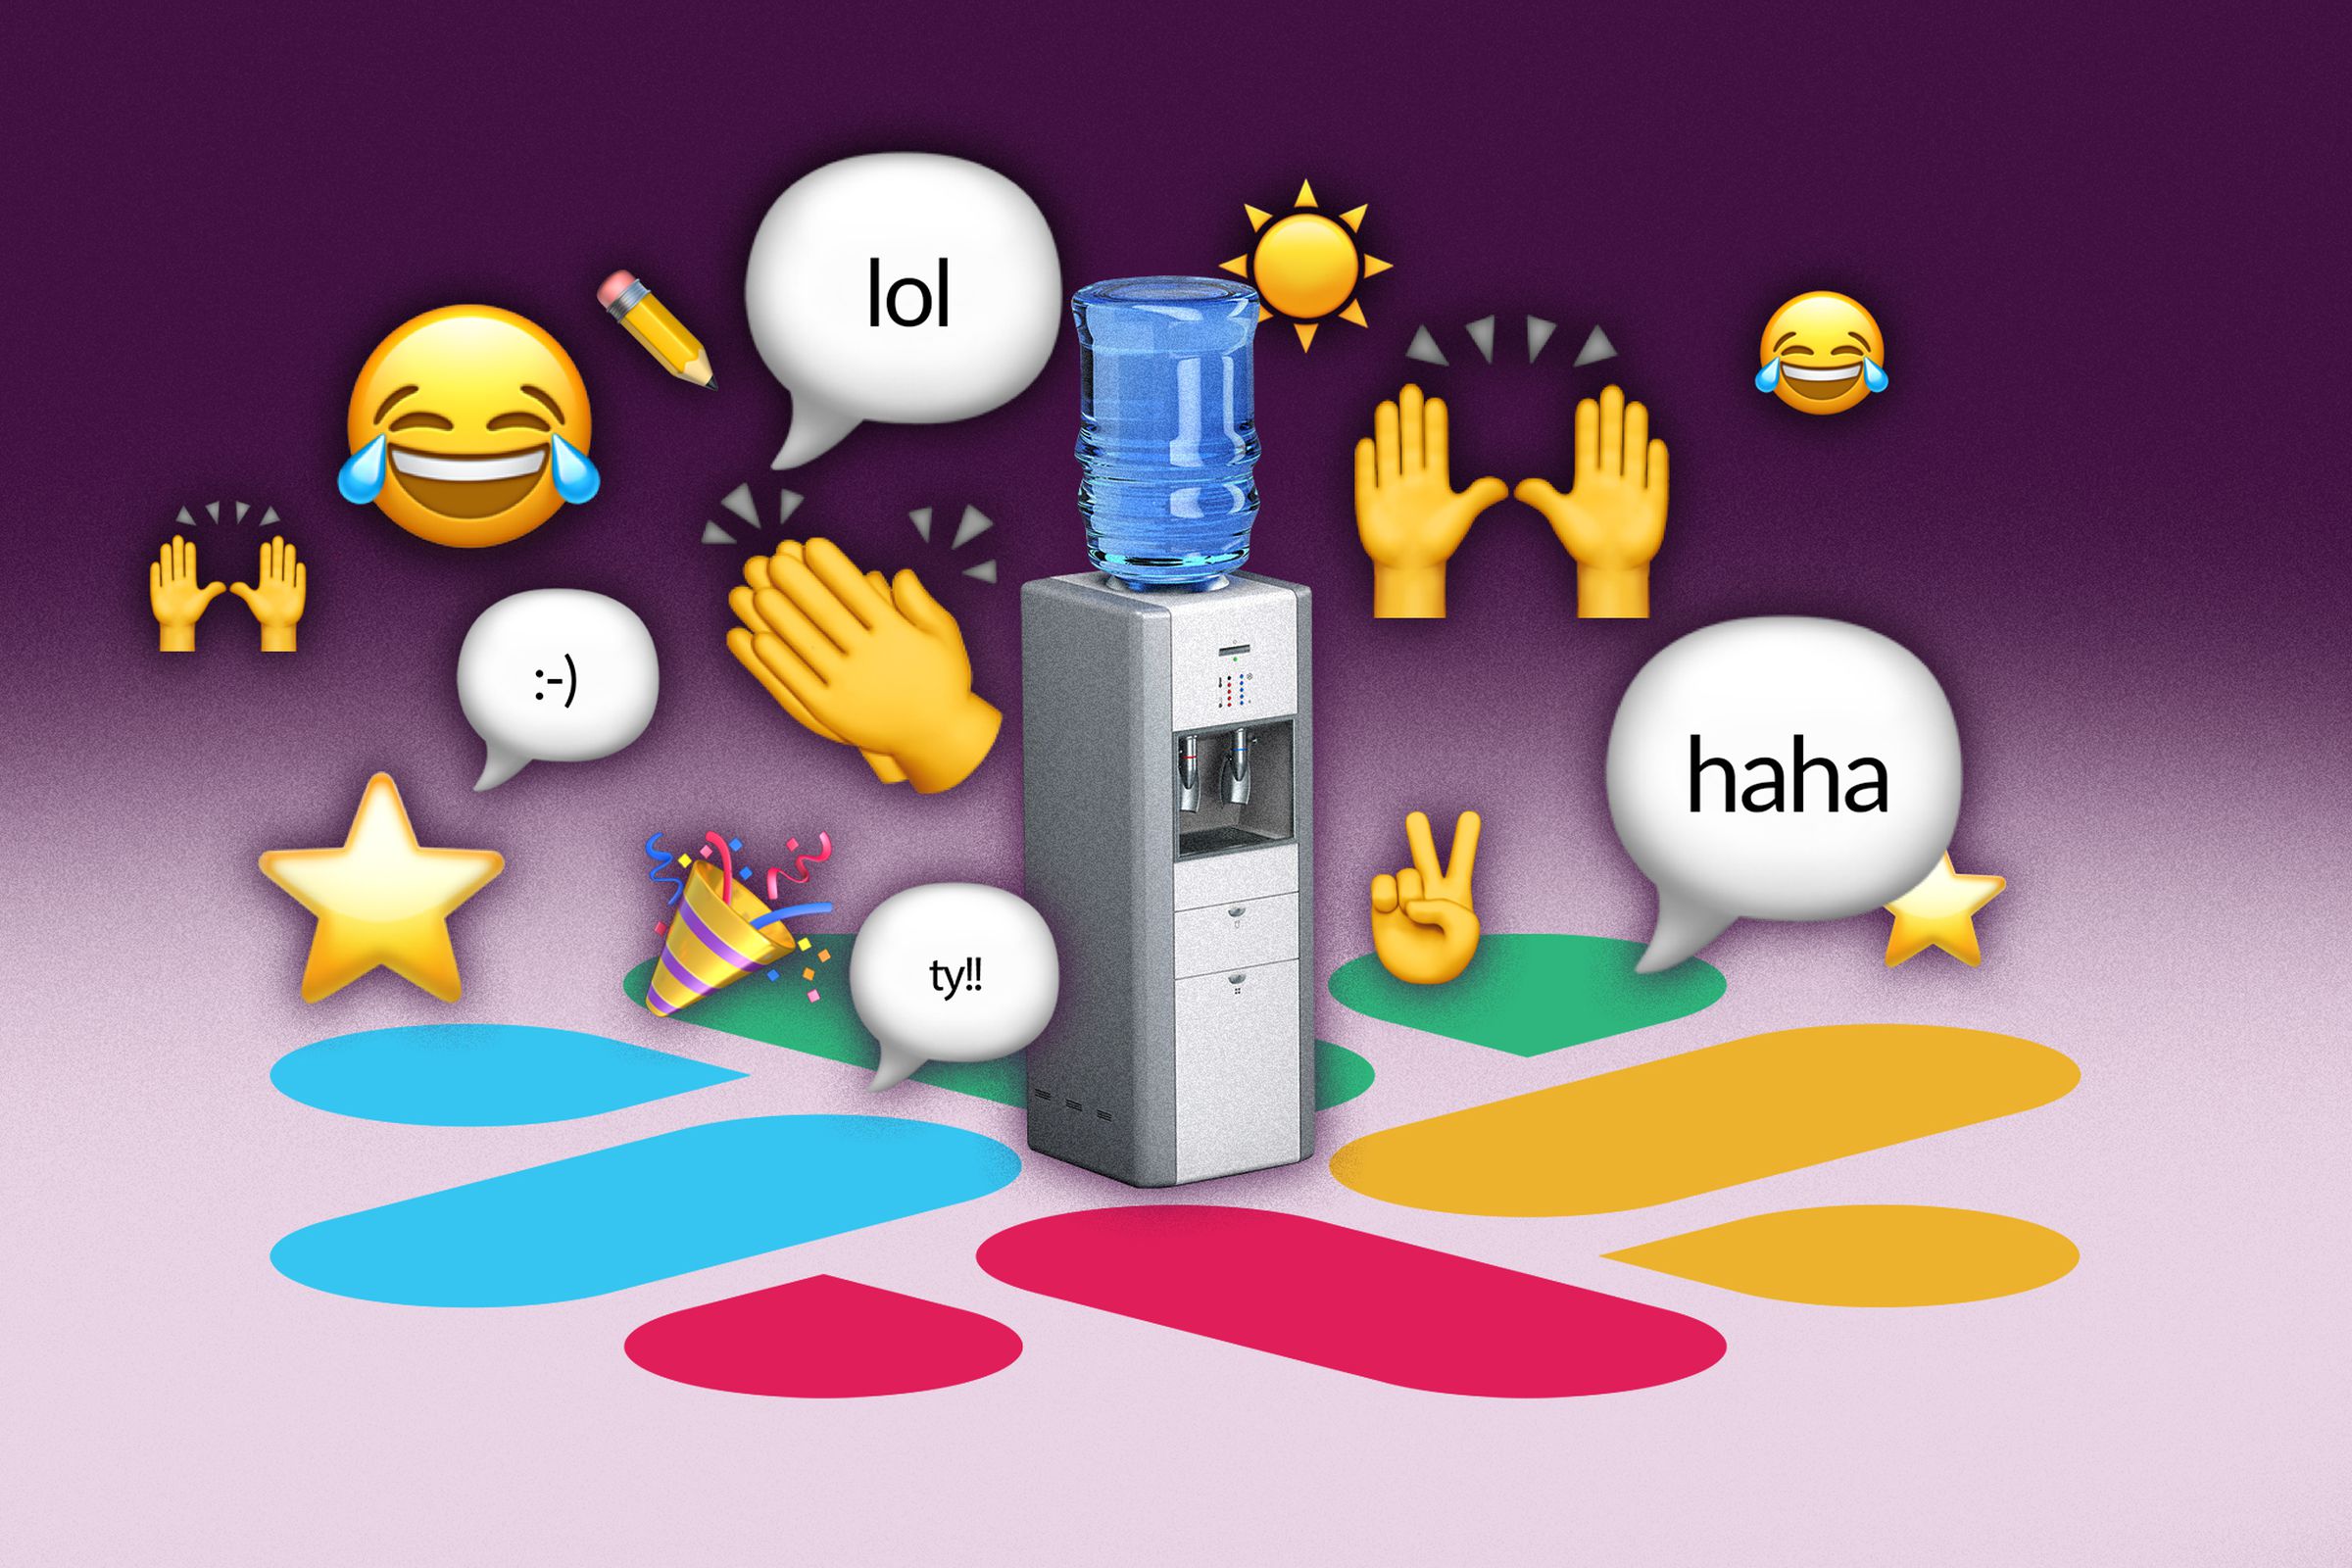 Illustration of a water cooler surrounded by emoji reactions and speech bubbles.